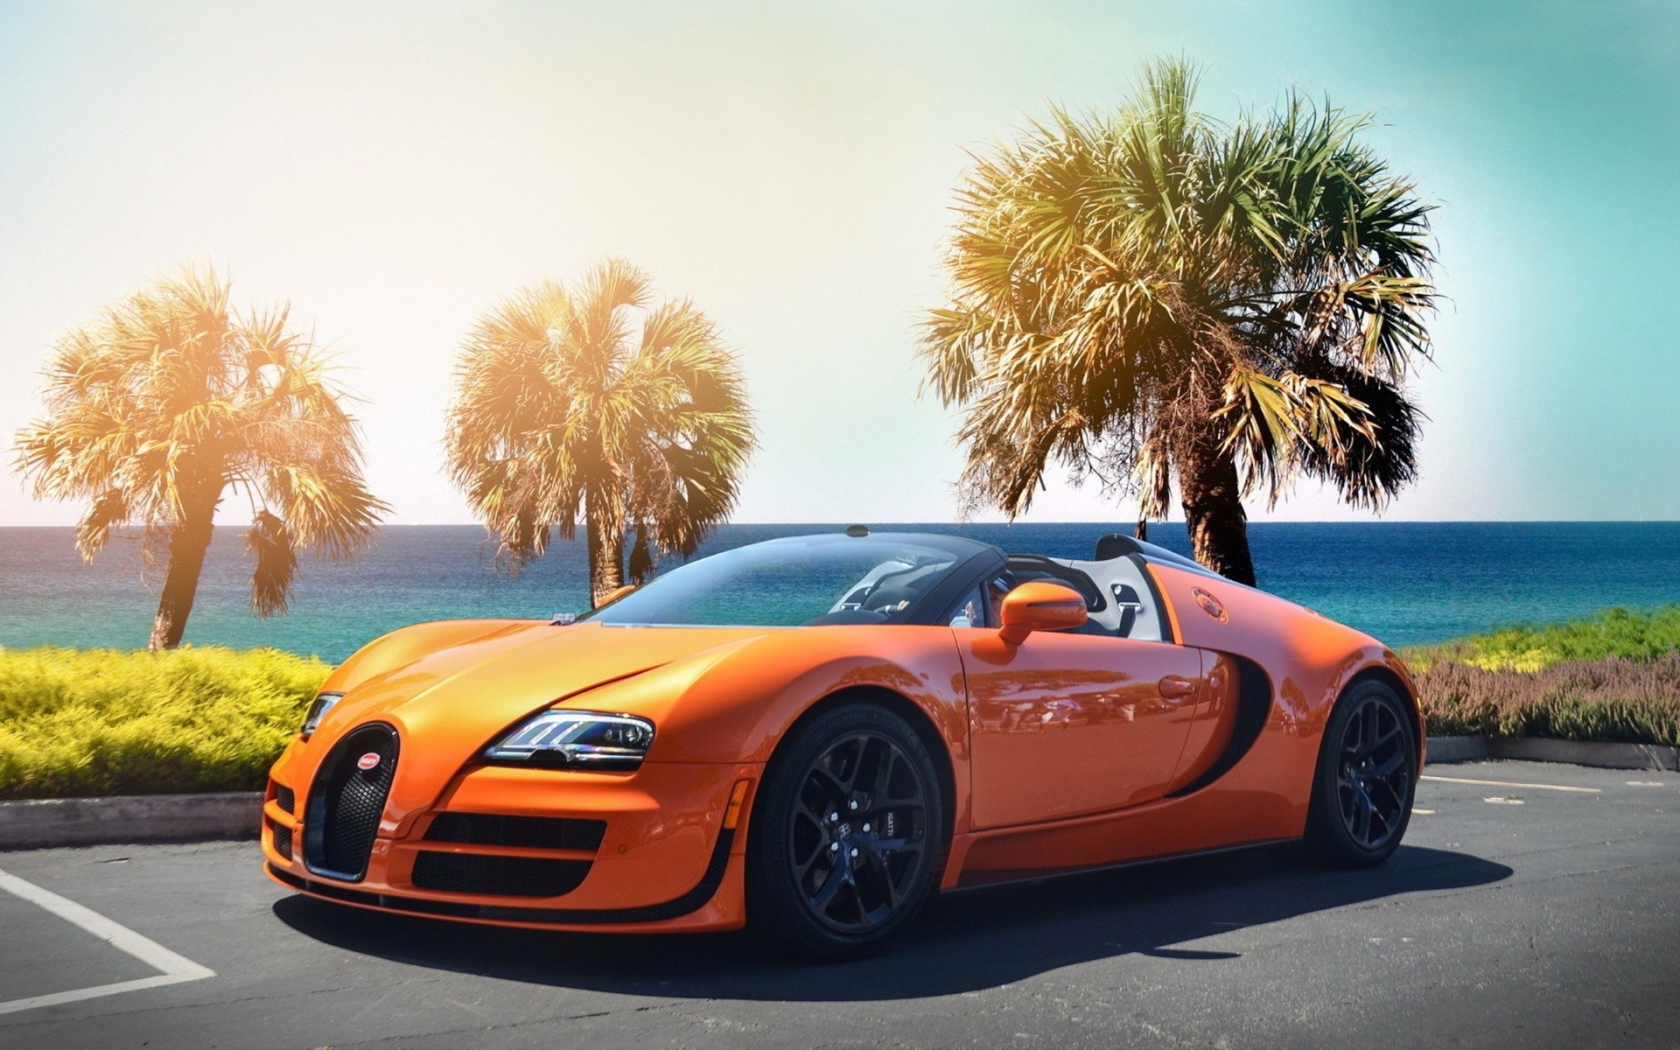 Orange Bugatti Veyron against the backdrop of palm trees by the sea